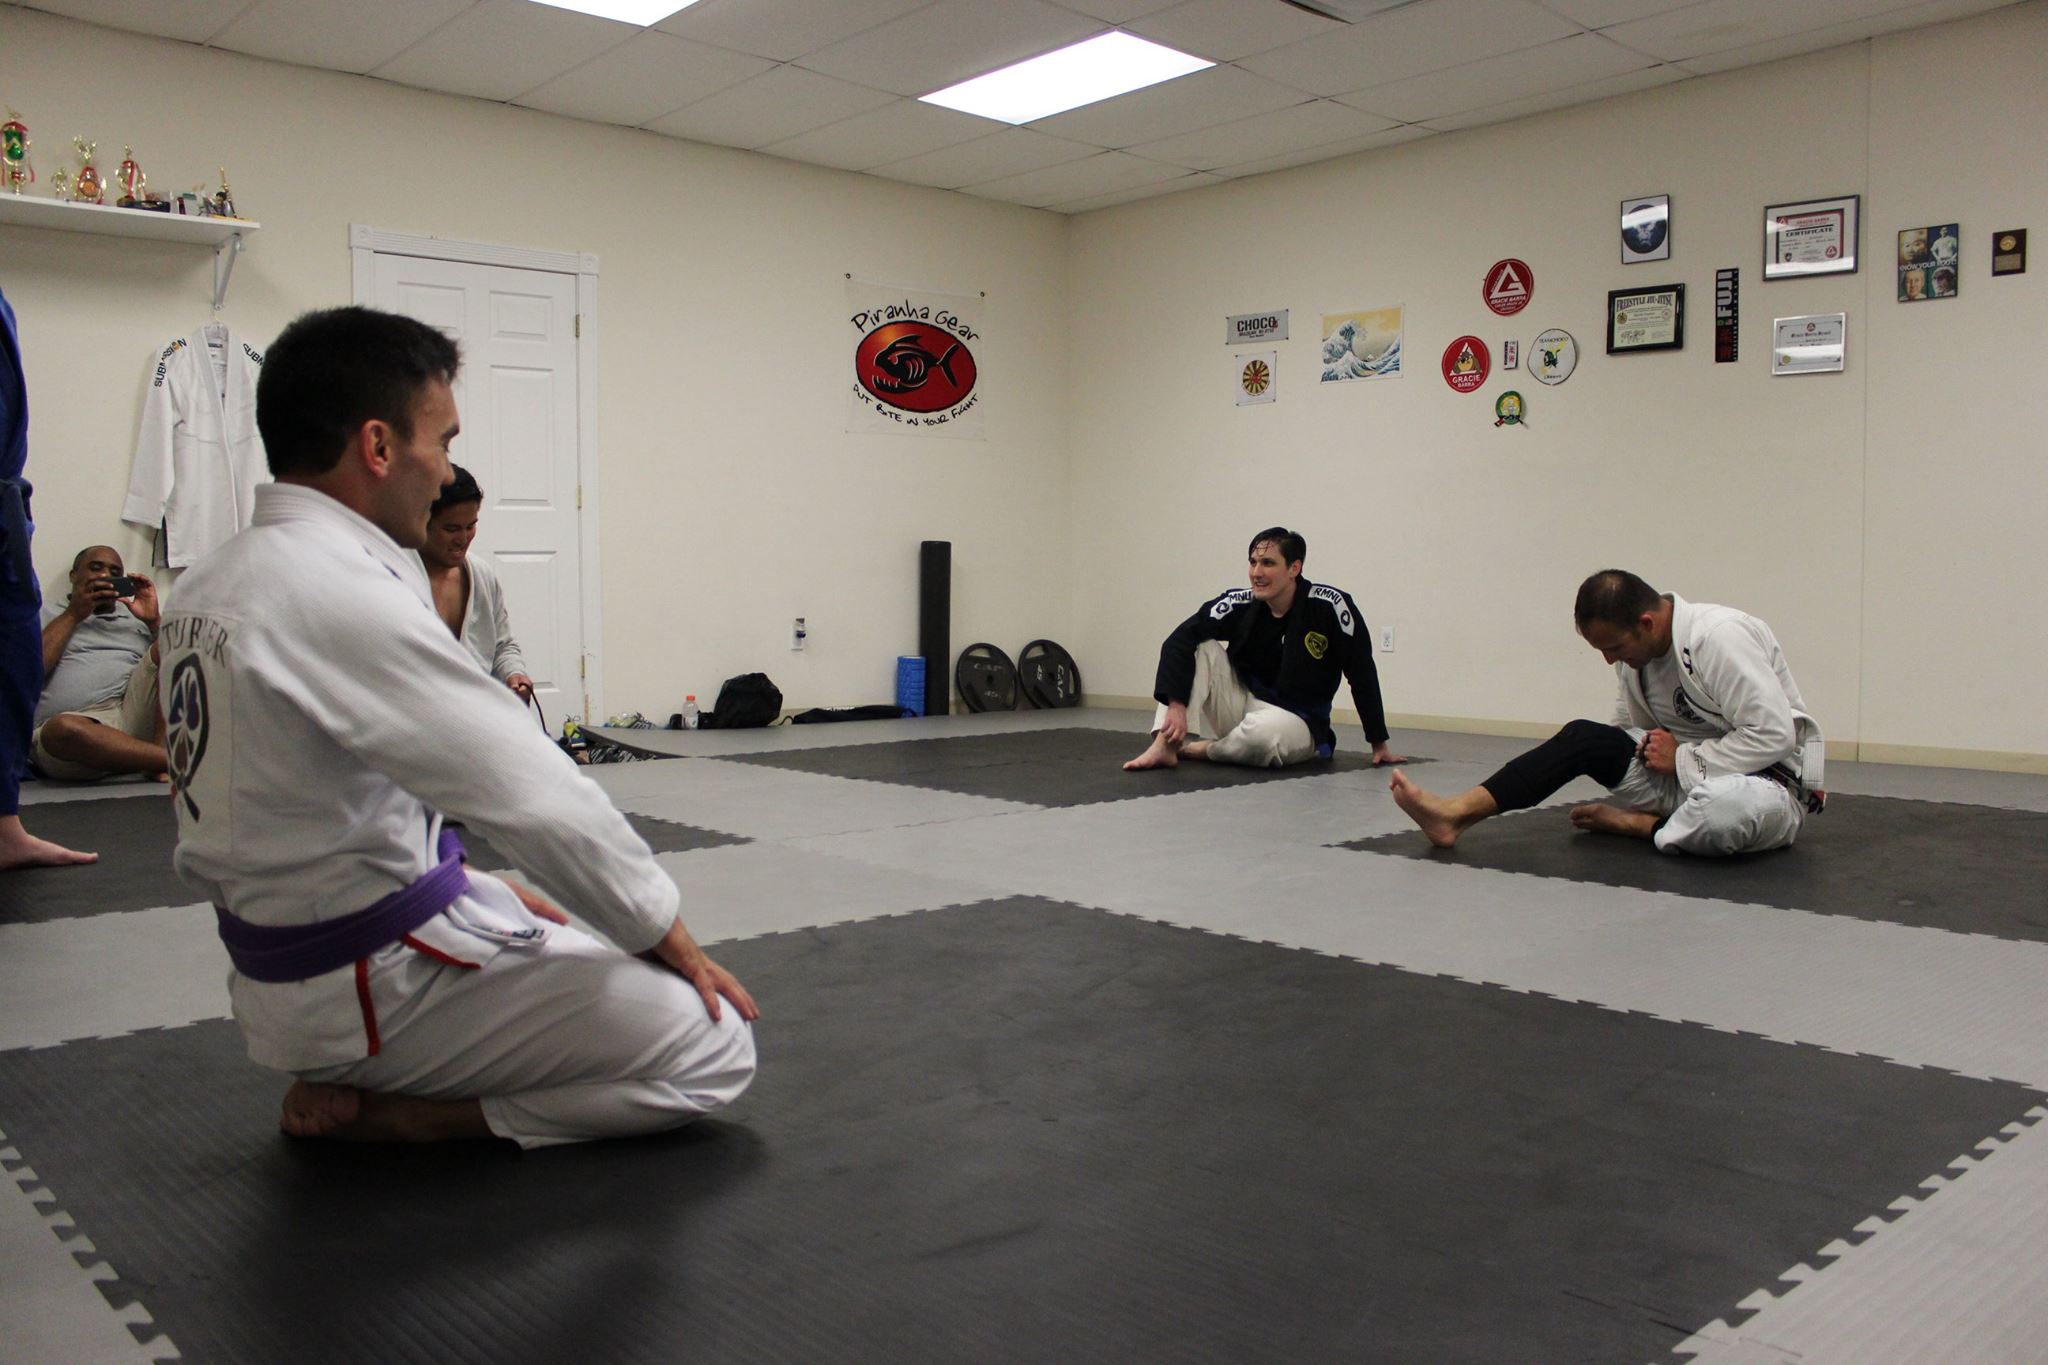 turner bjj on mma grappling mats for class